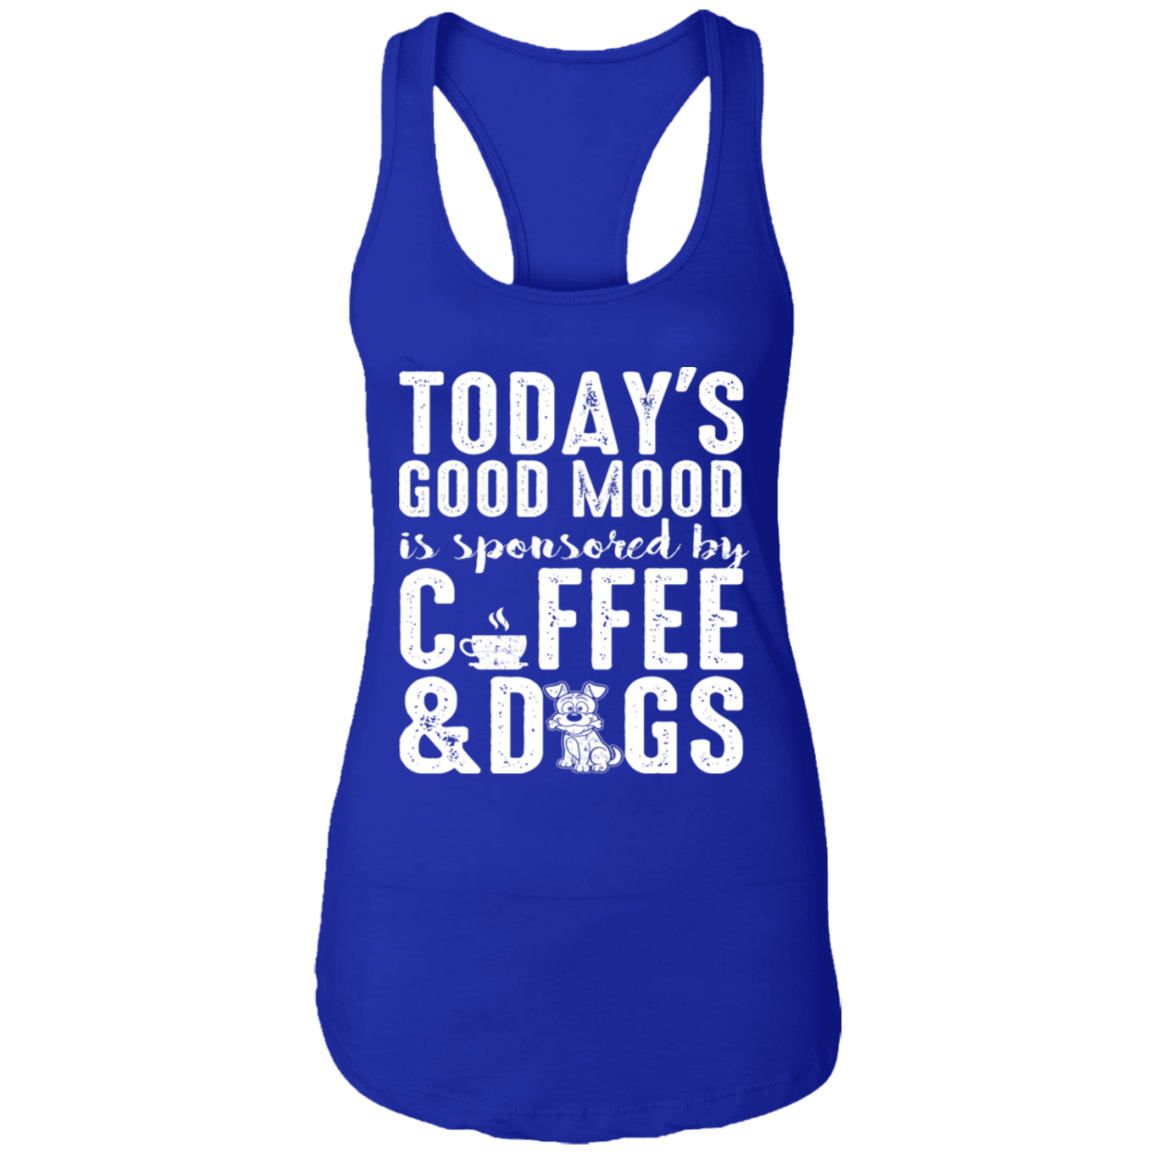 Today's Good Mood Coffee & Dogs - Ladies Racer Back Tank.